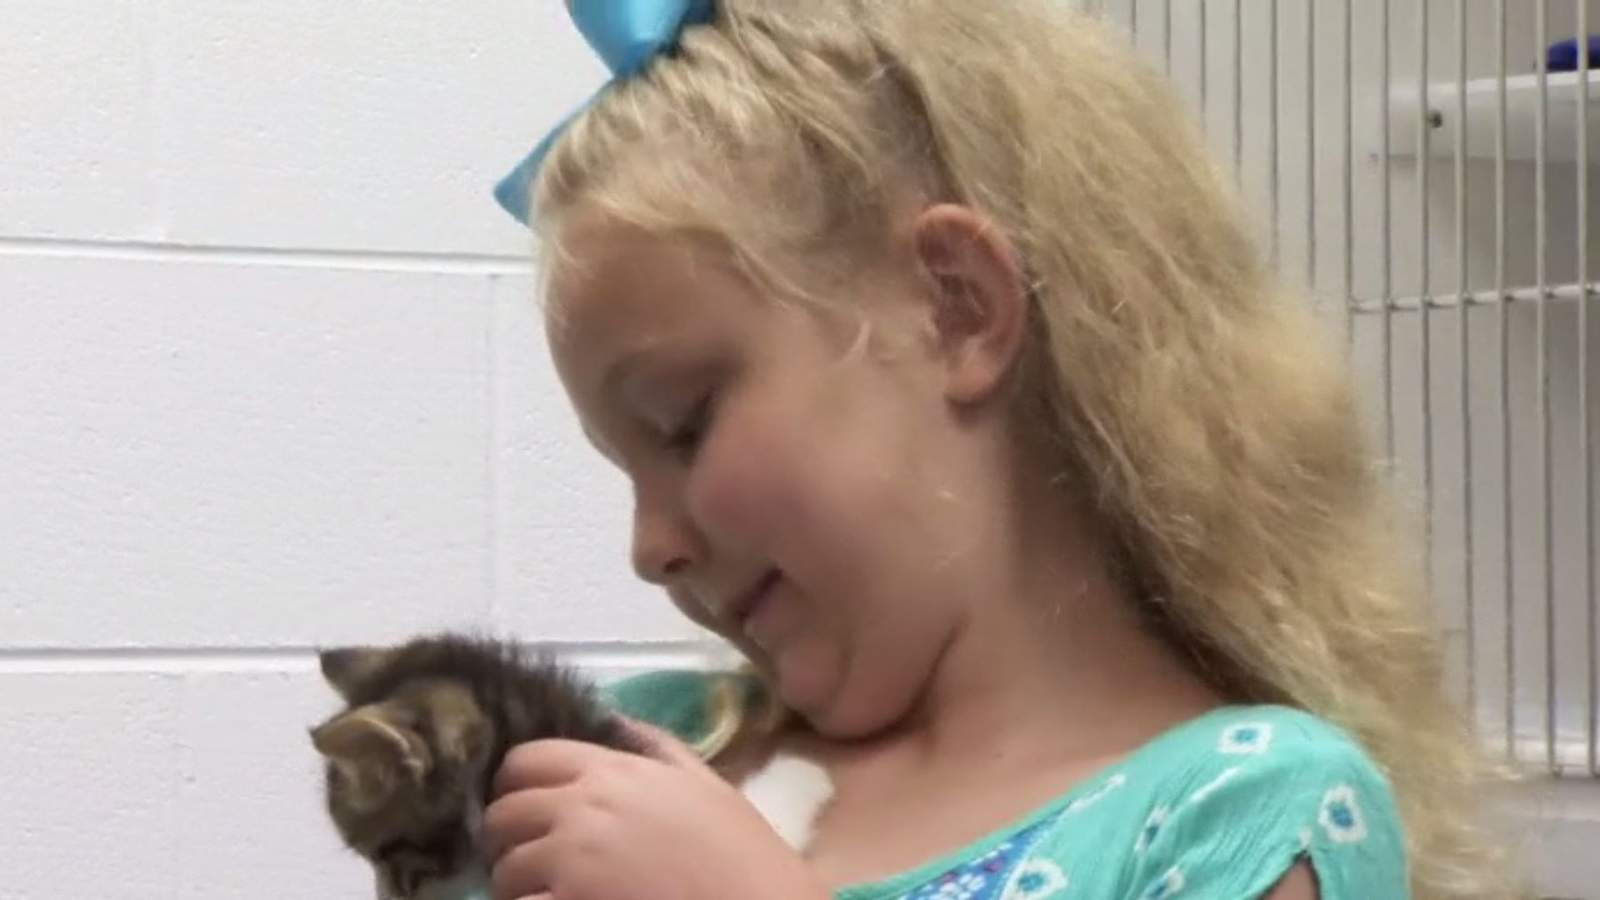 Helping shelter pets: Local 6-year-old chooses the gift of giving for her birthday